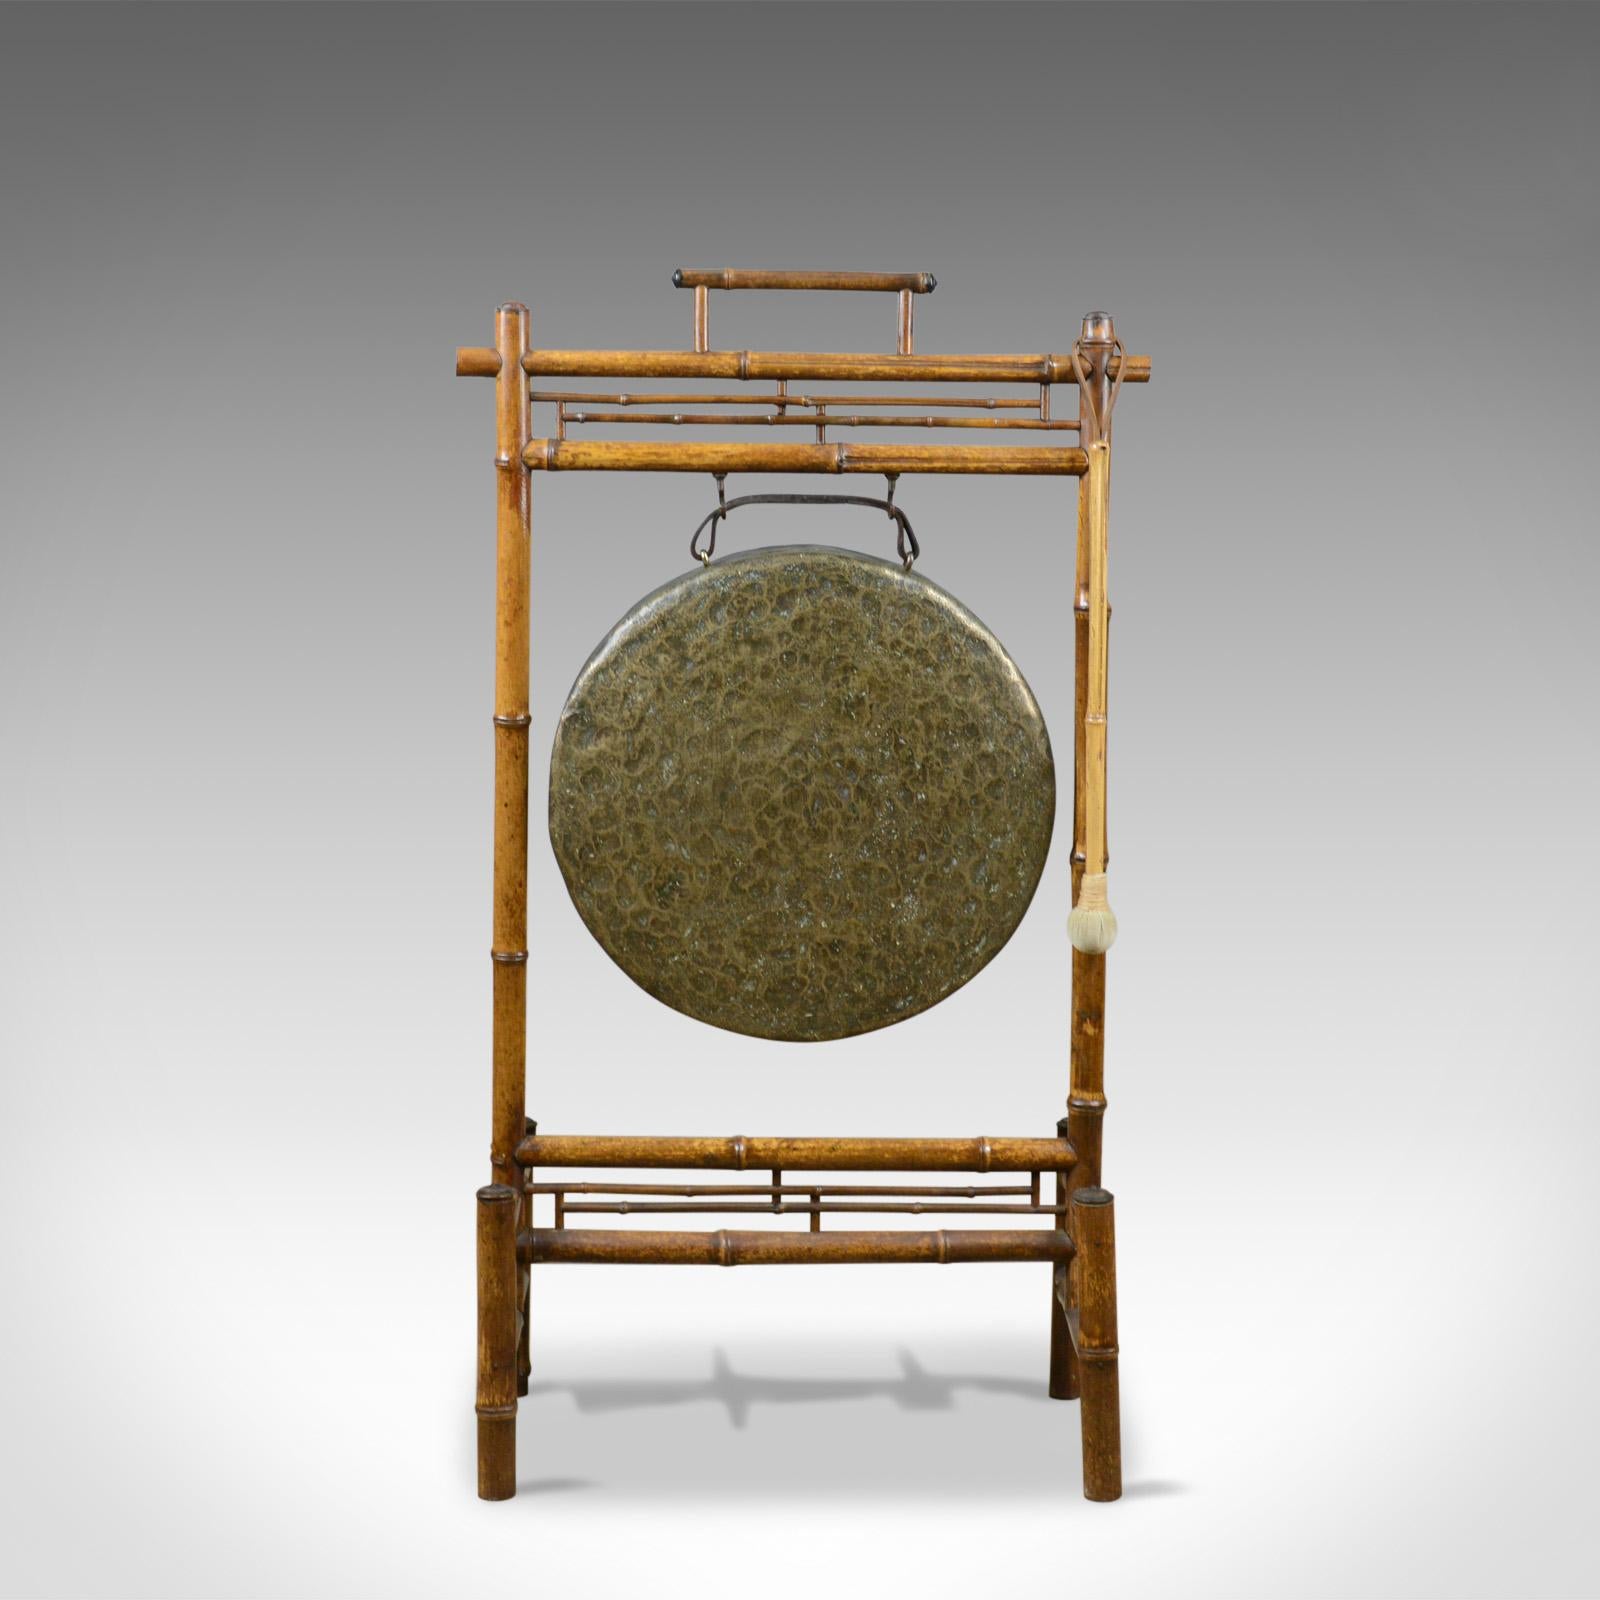 This is a large antique bronze dinner gong mounted in a bamboo frame. A Victorian instrument dating to the late 19th century, circa 1890.

Attractive bronze gong with natural aged patina
Hammered finish with deep sides
Leather hanging